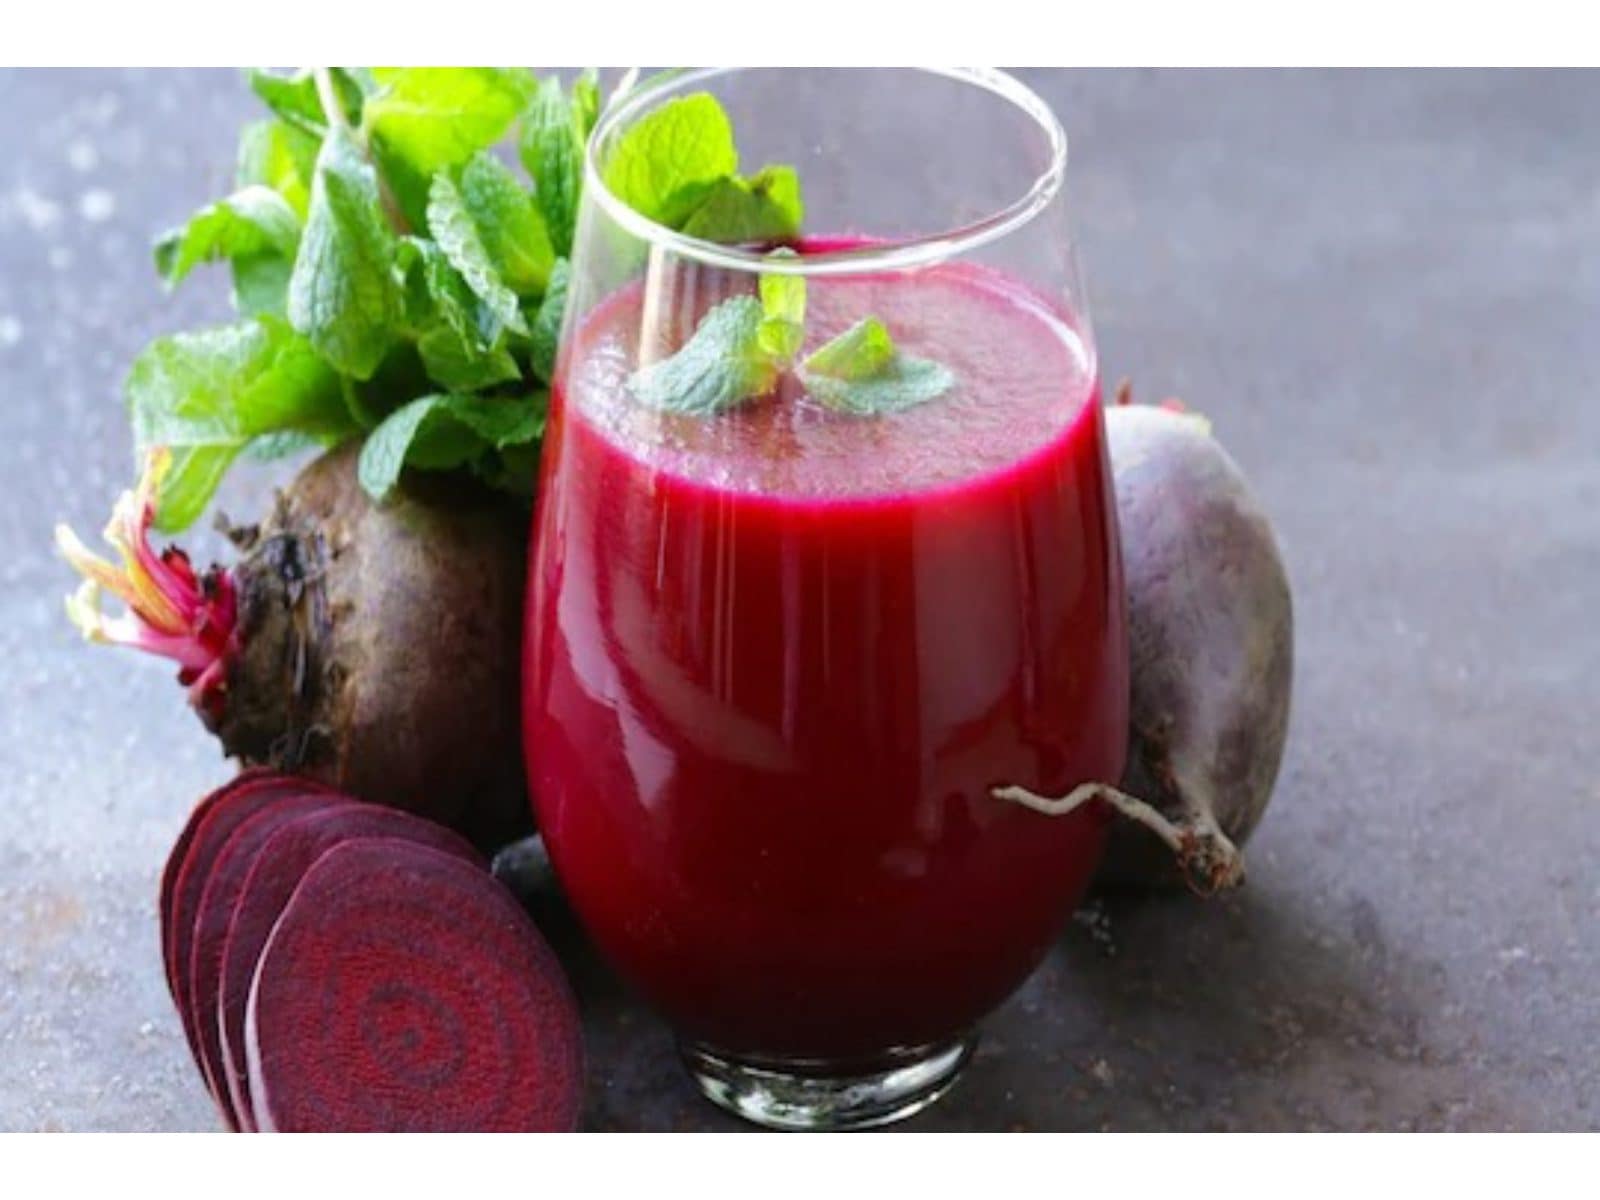 Why You Should Avoid Beetroot And What It Can Do To Your Body